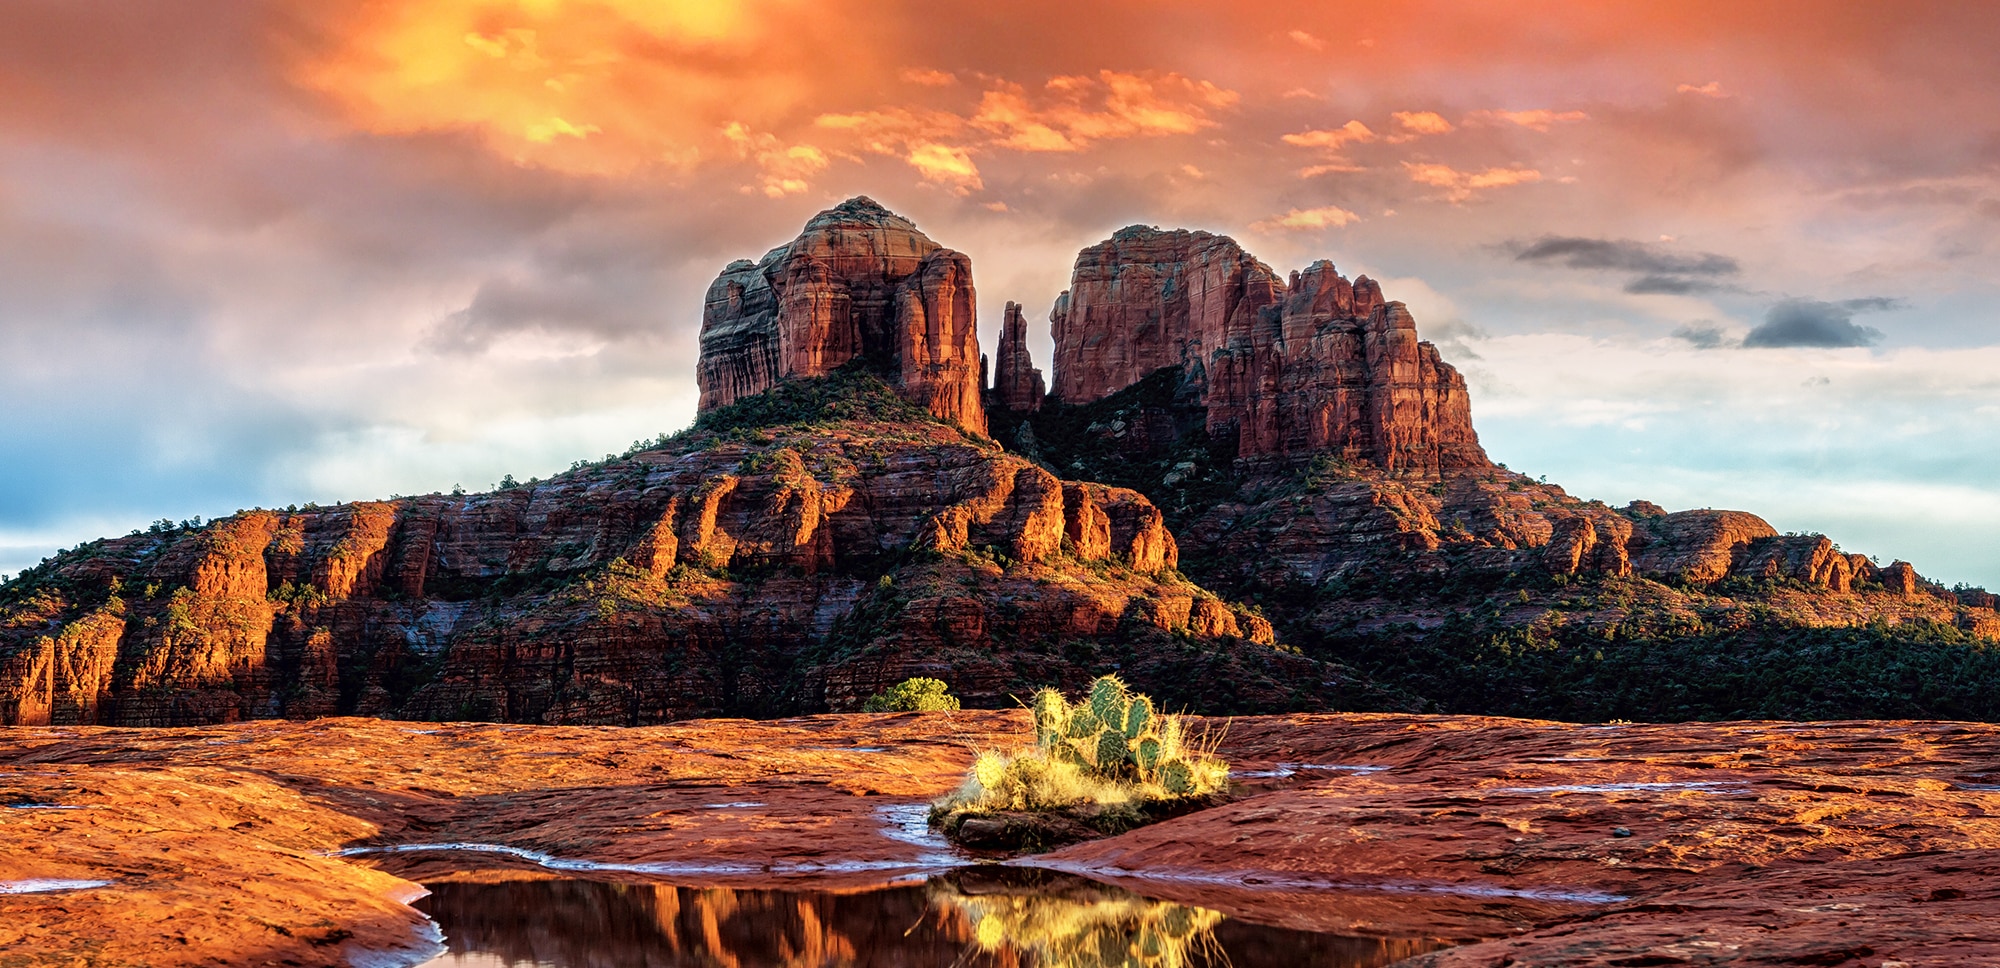 Sedona's magnificent red rock landscapes are calling...Start adventuring with fellow women travelers and Canyon Calling Adventure Tours for women only